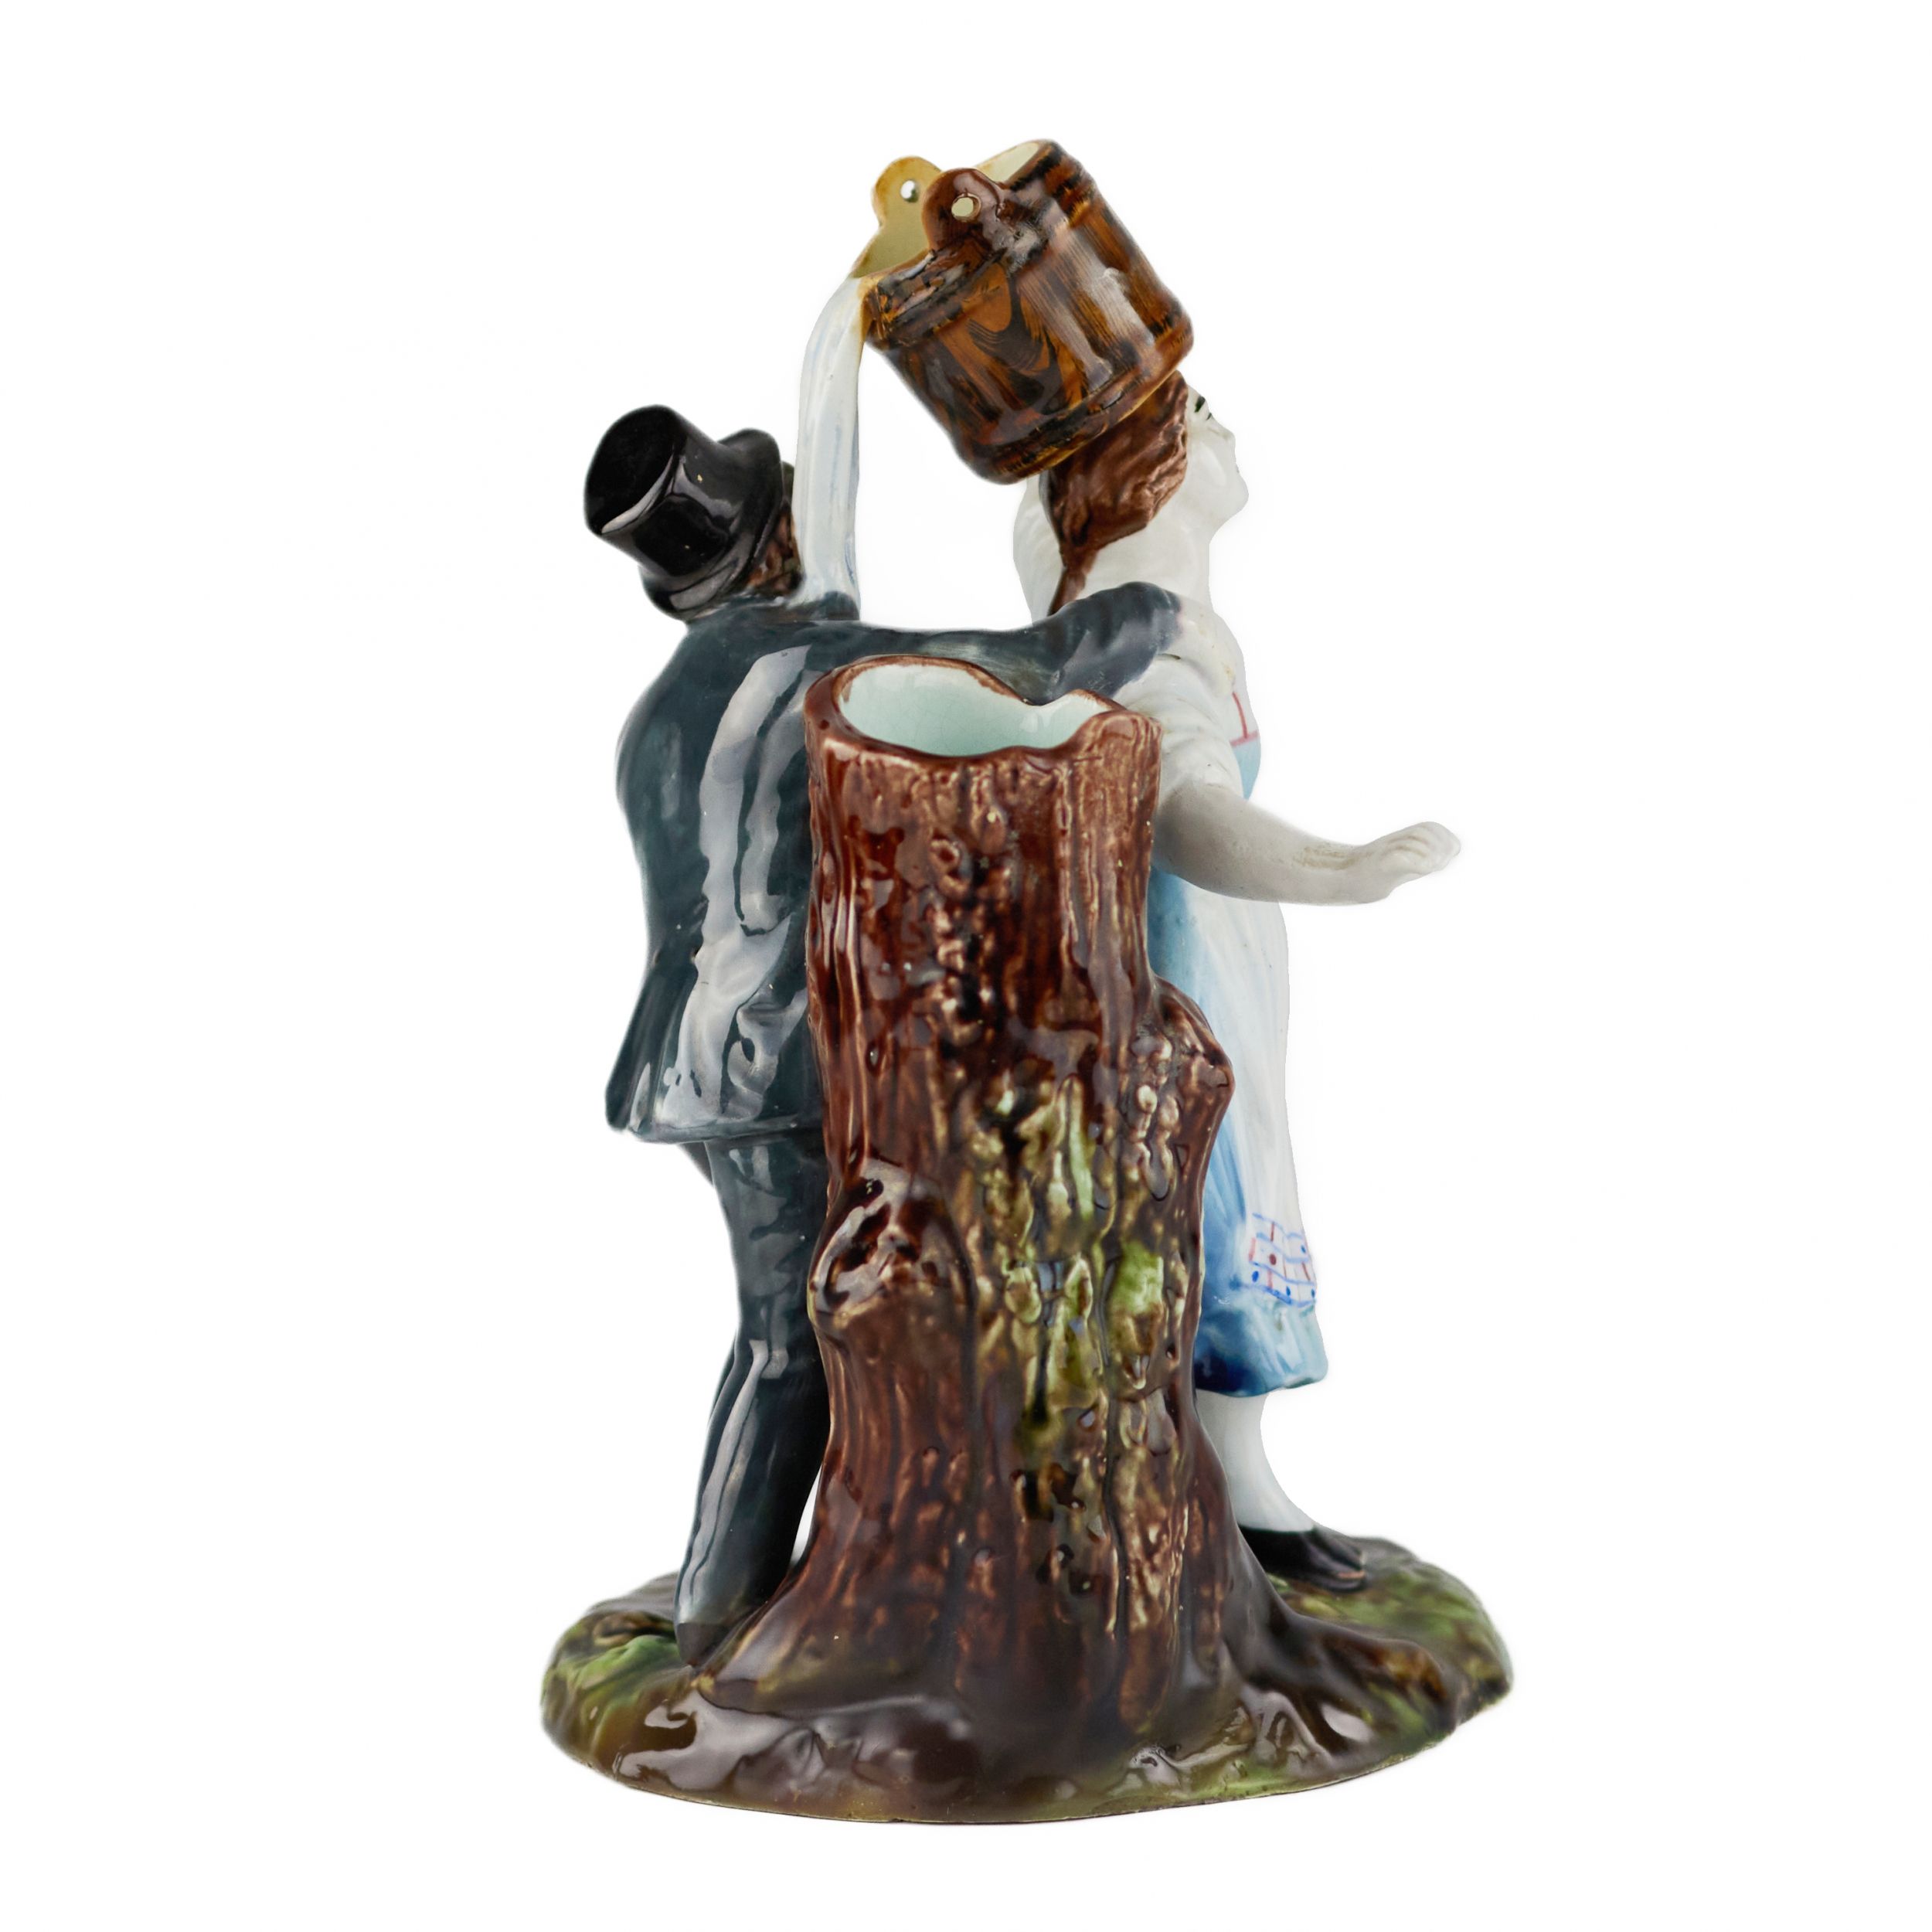 Faience pencil figurine The Villager and the Lord. Kuznetsov factory in Tver. 19th century. - Image 5 of 9